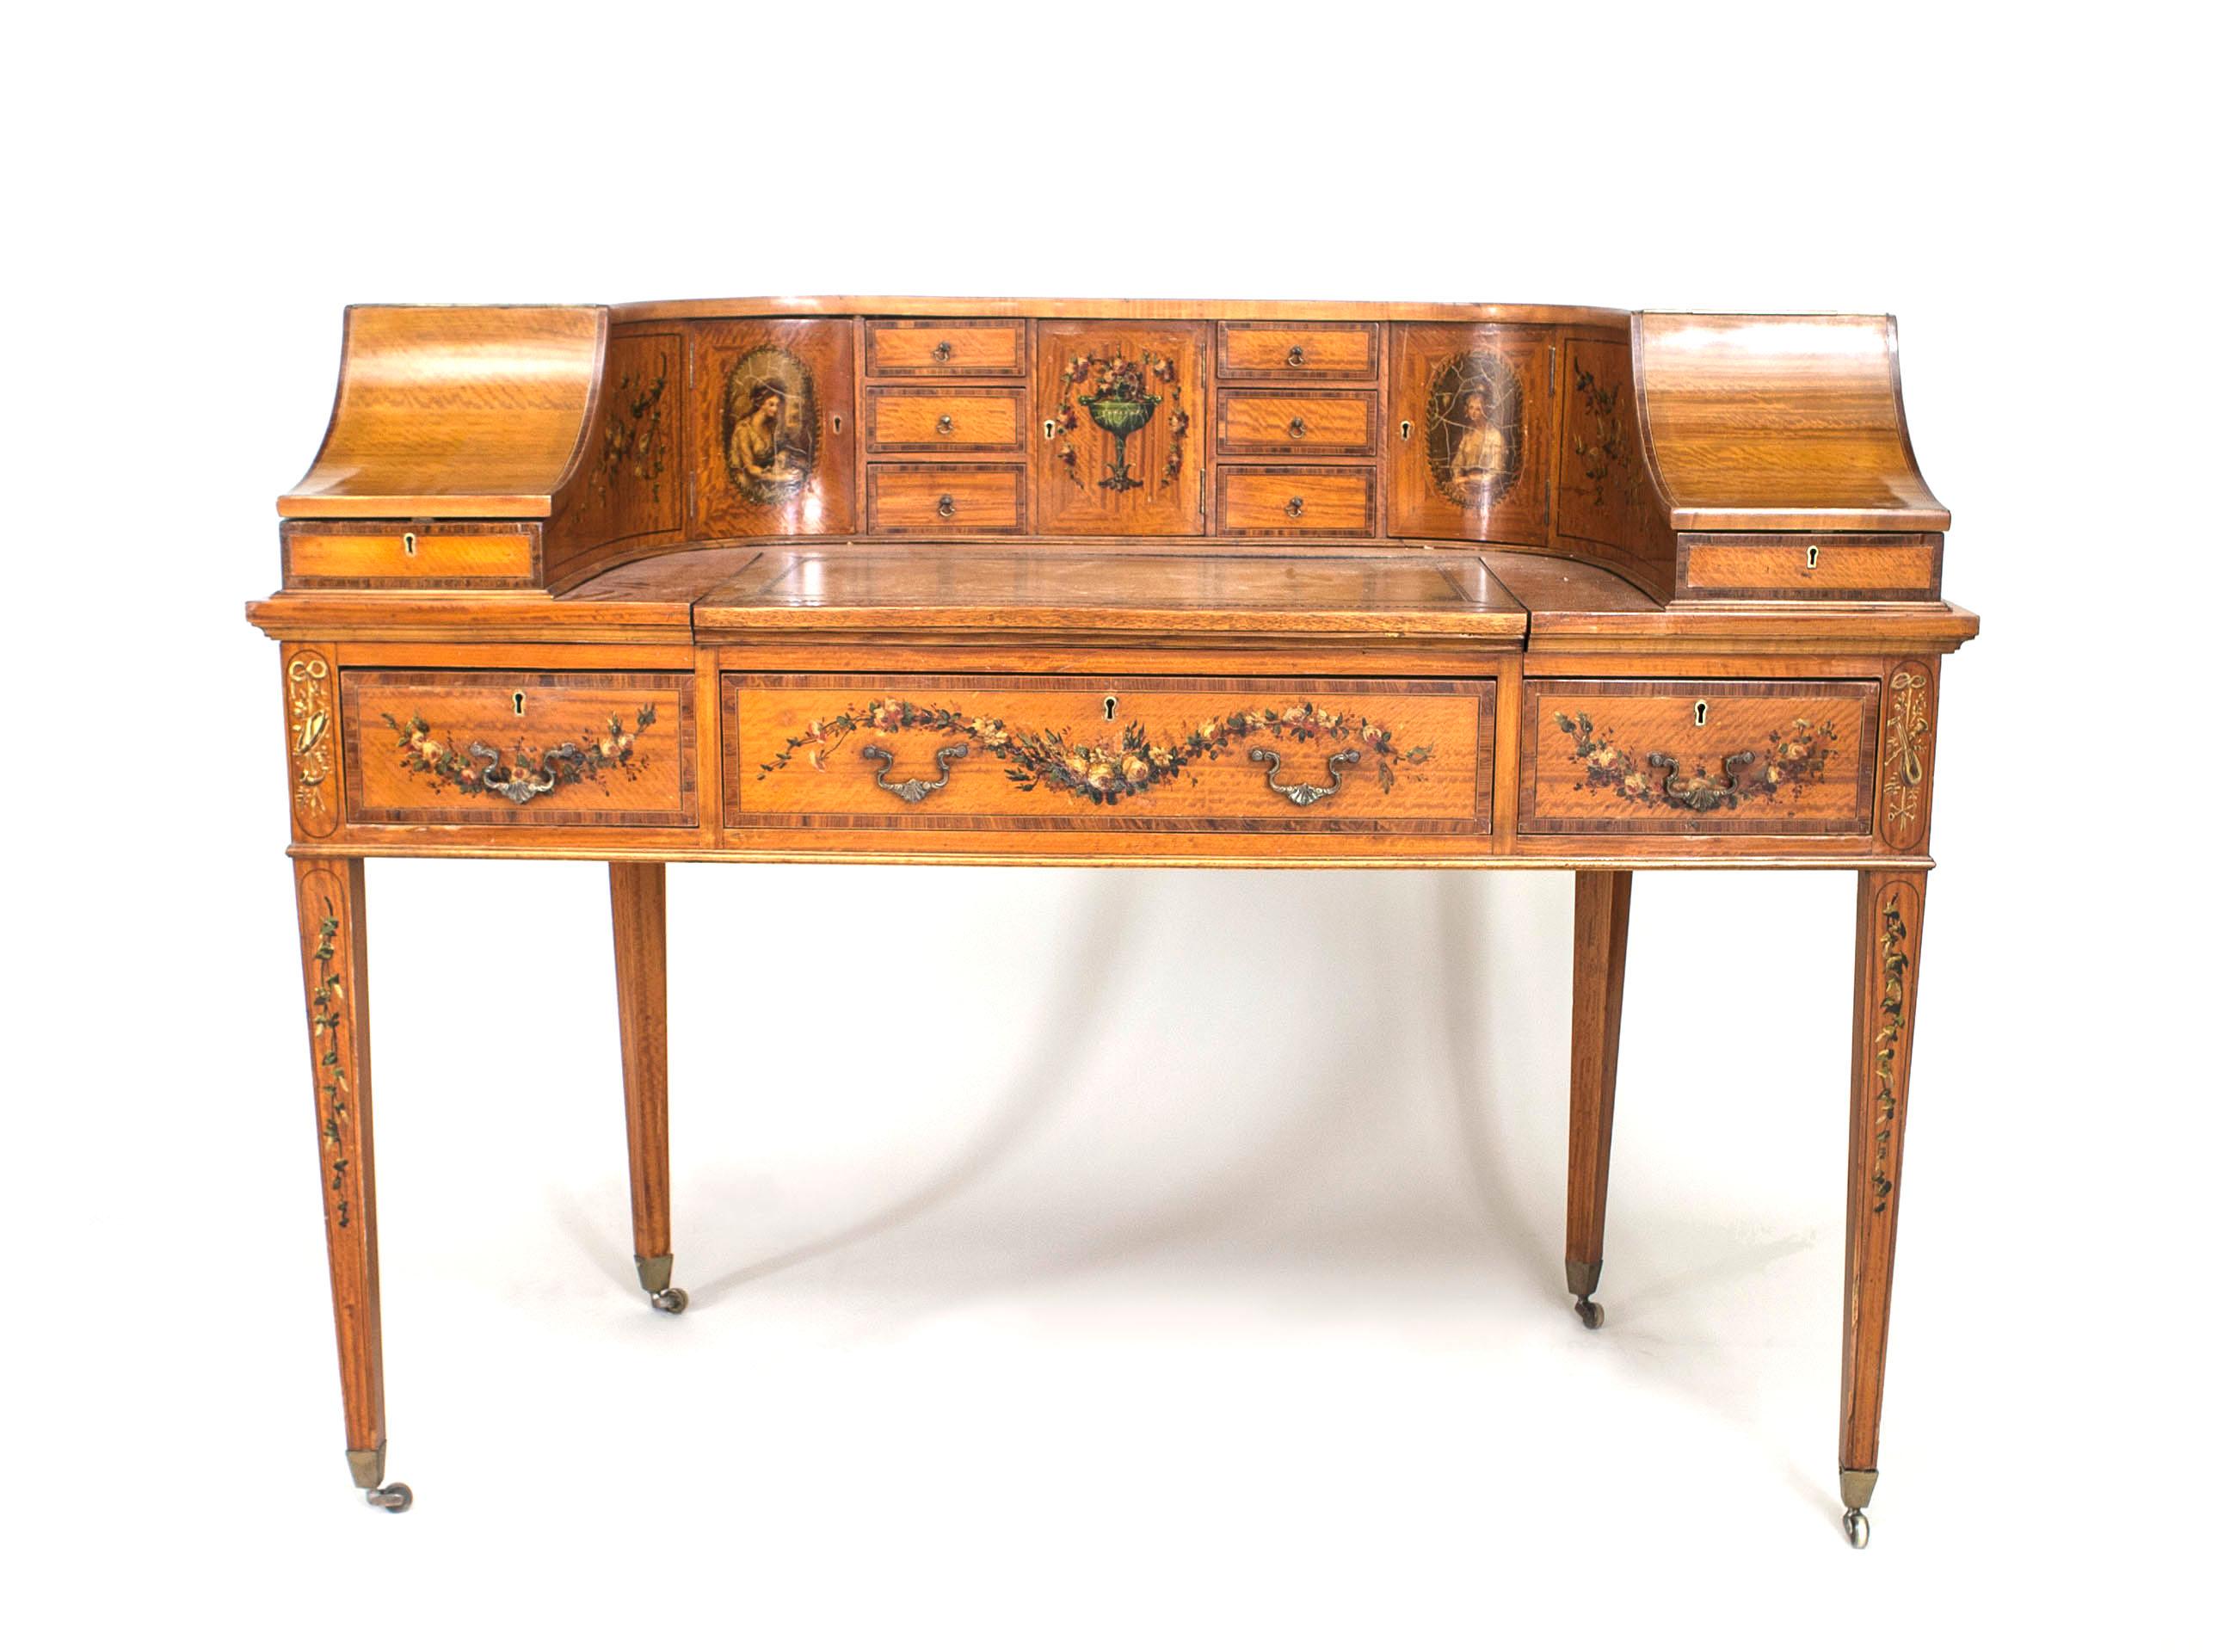 19th century English Adam style satinwood Carlton House design desk with painted floral decorative trim and green leather top.